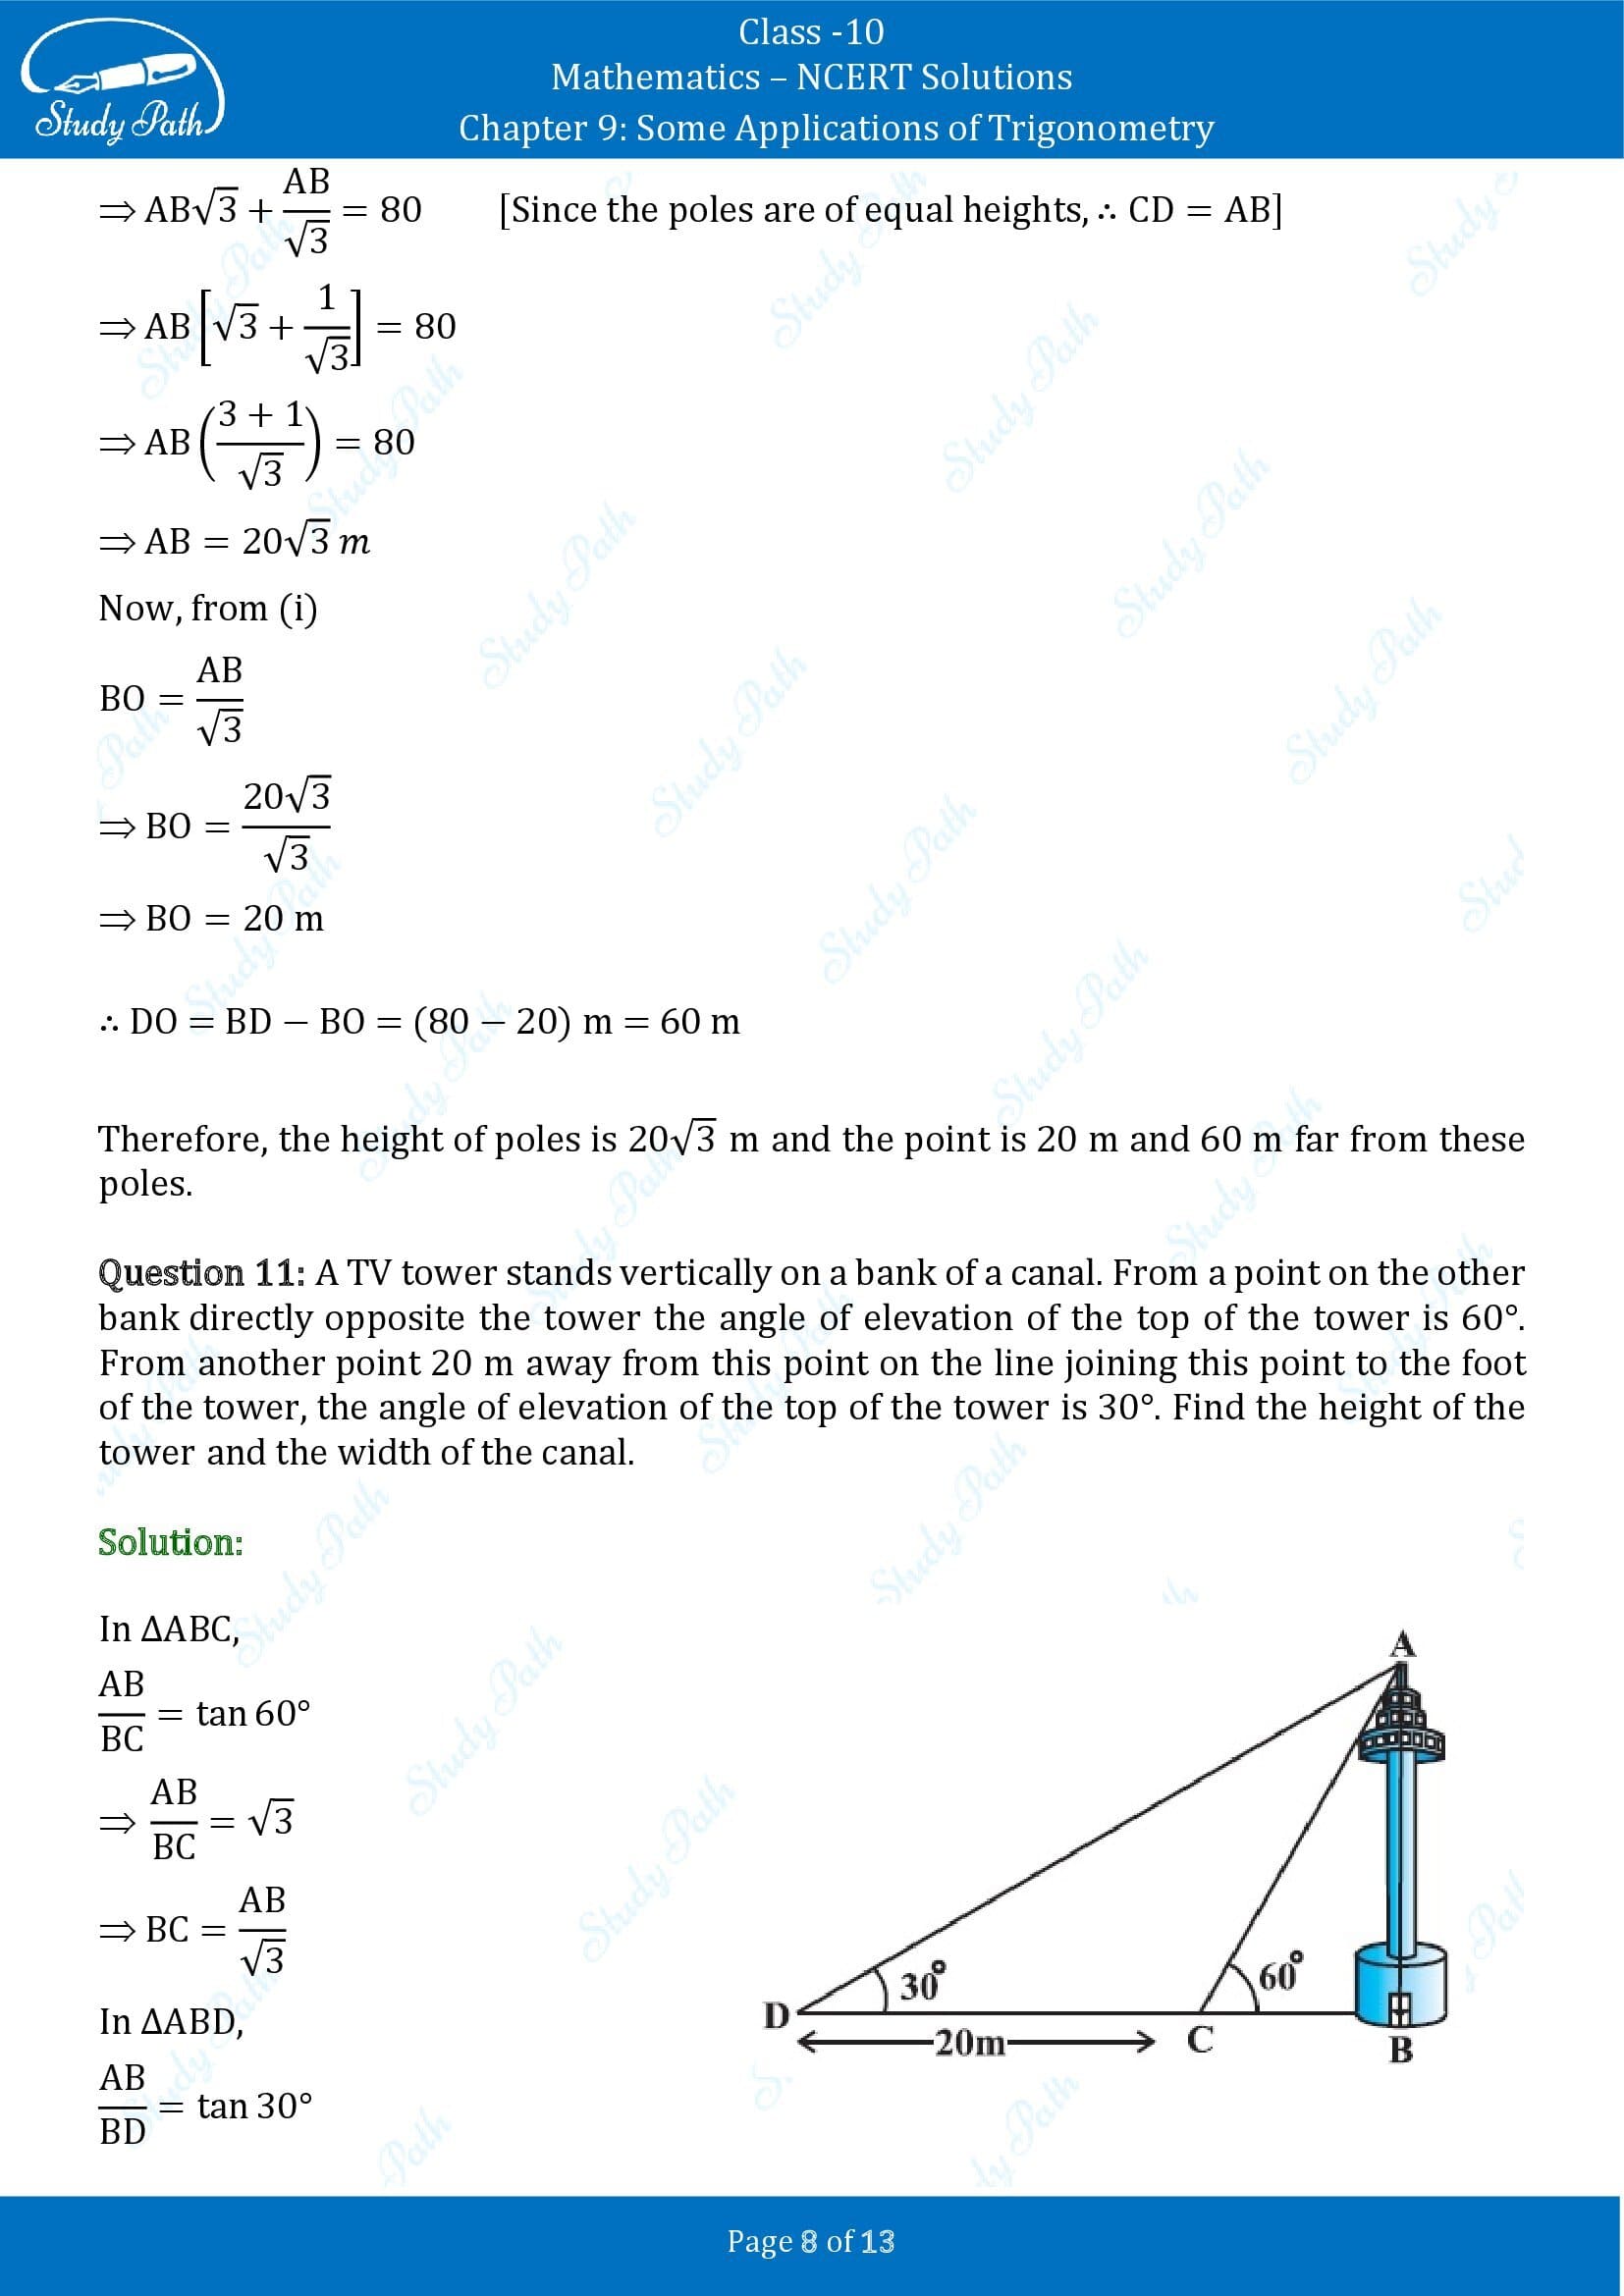 NCERT Solutions for Class 10 Maths Chapter 9 Some Applications of Trigonometry 00008